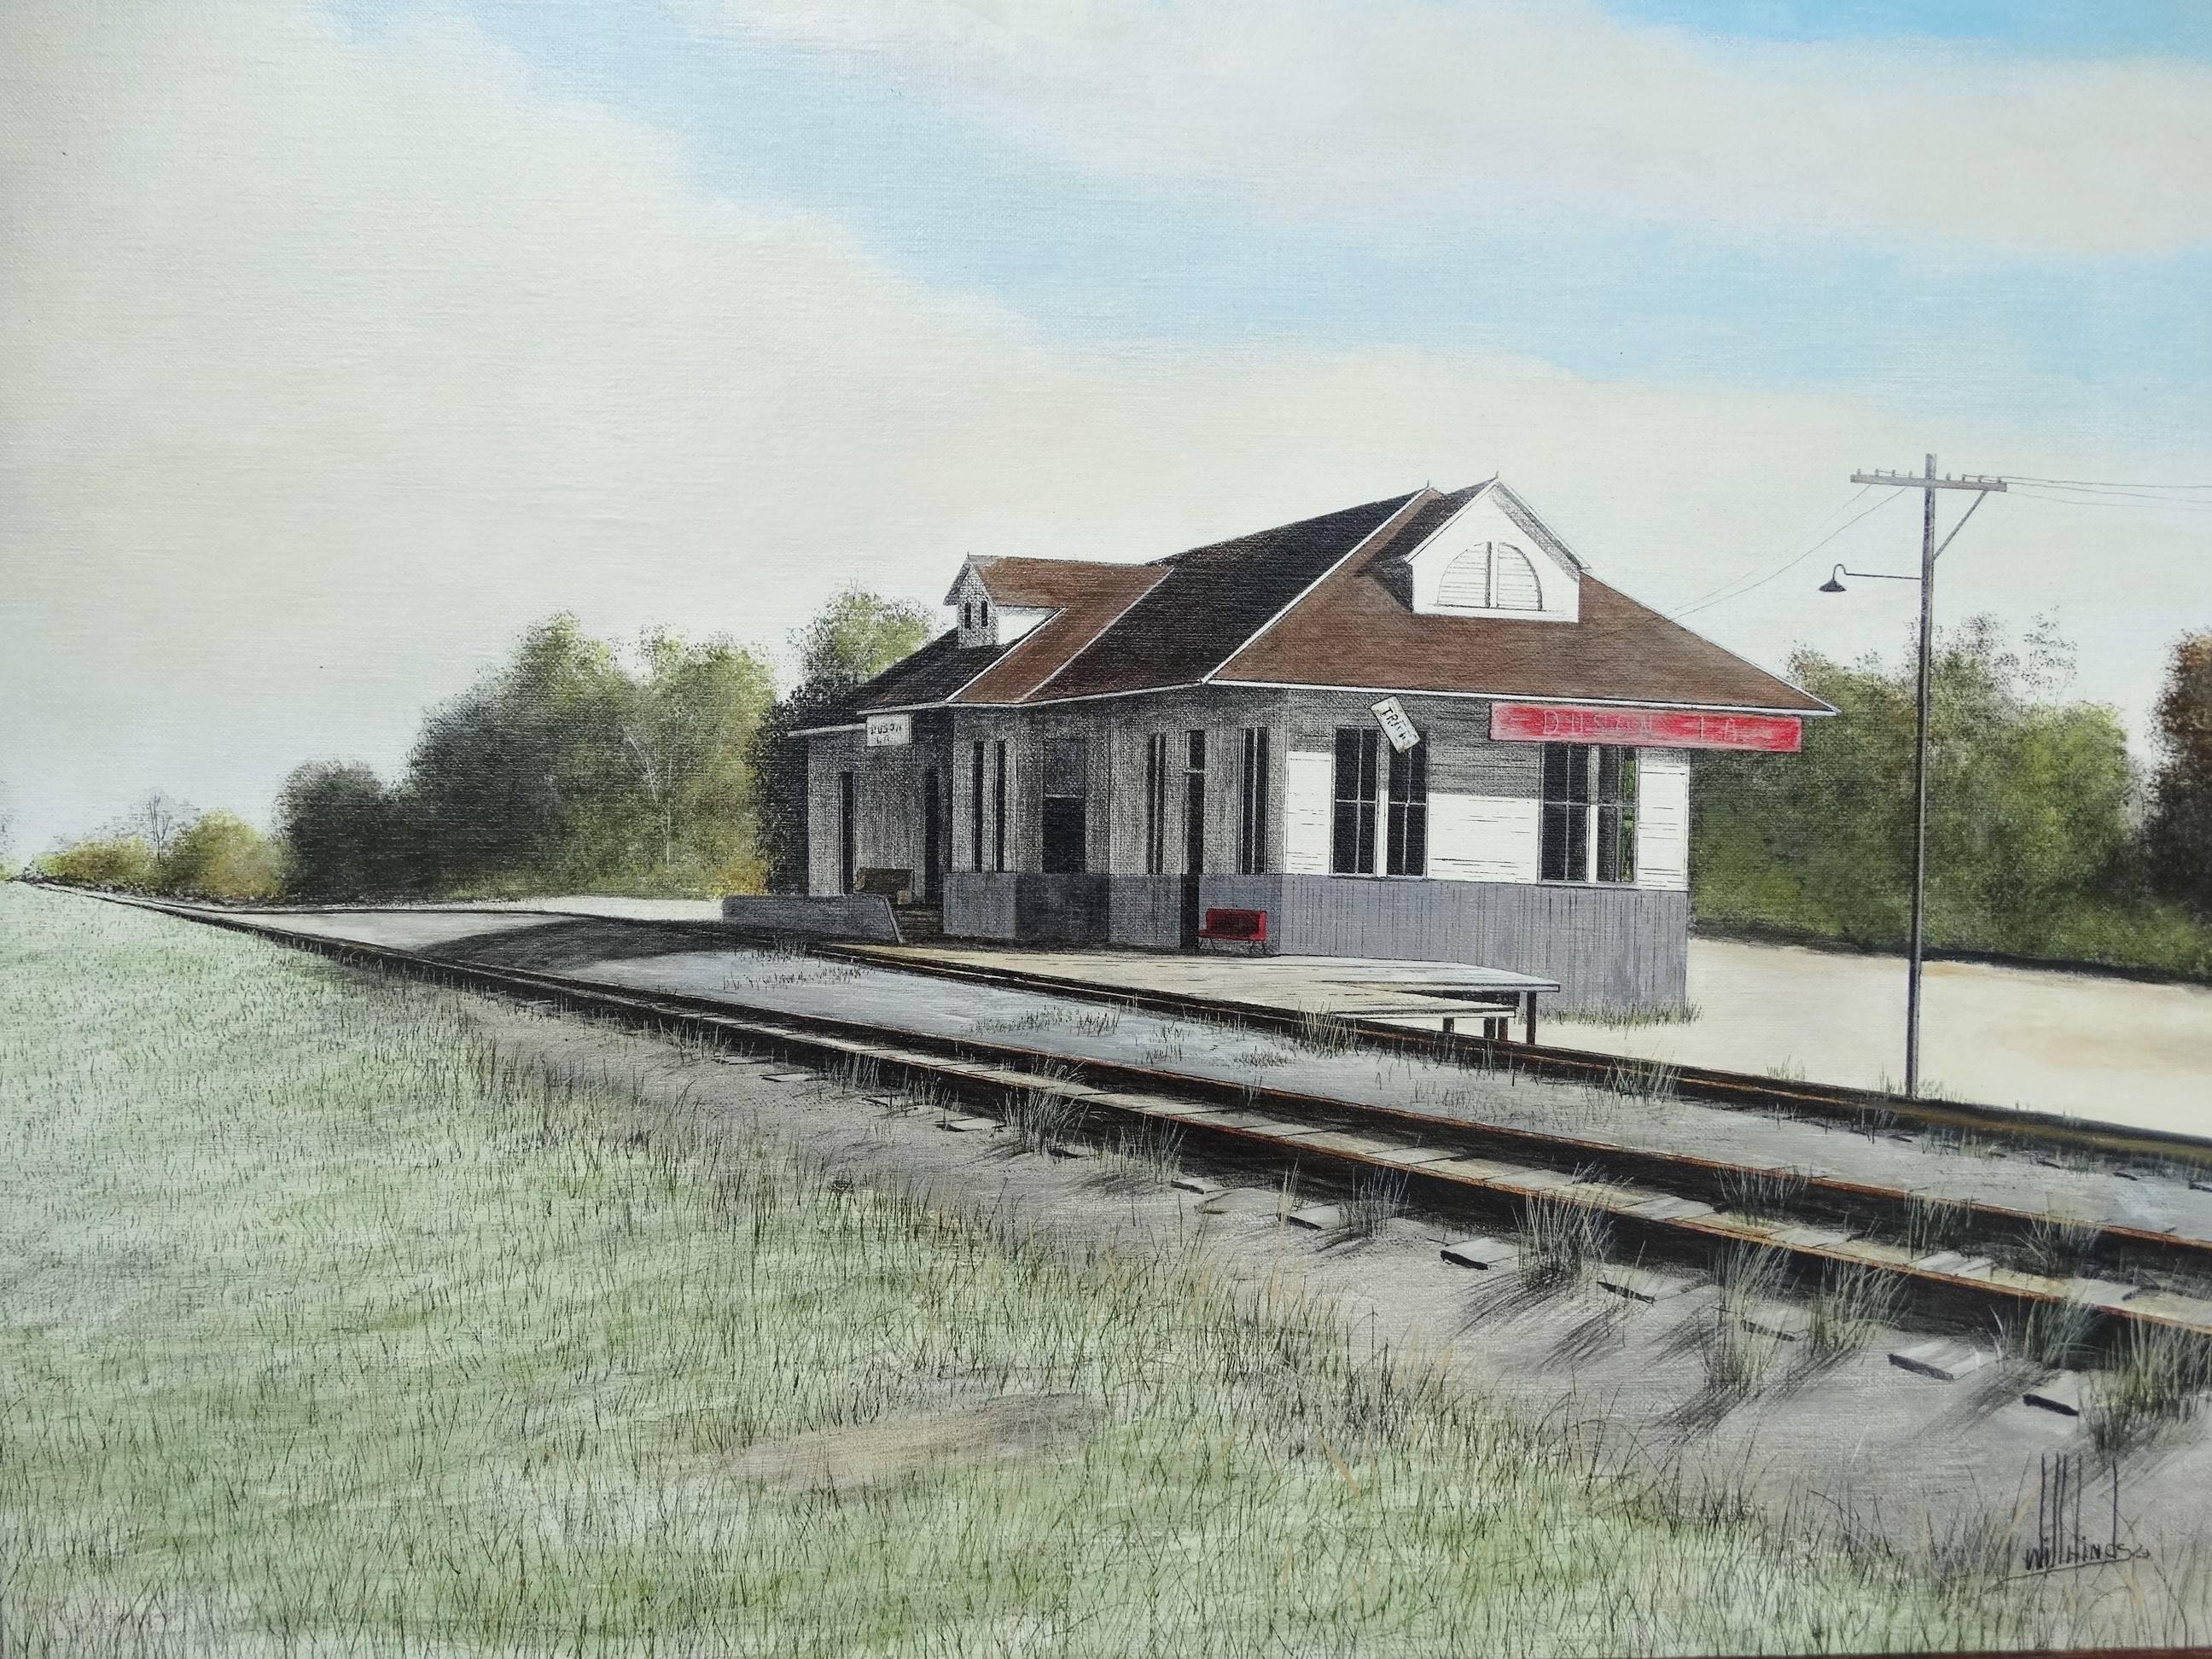 Will Hinds Landscape Painting - "Southern Station"